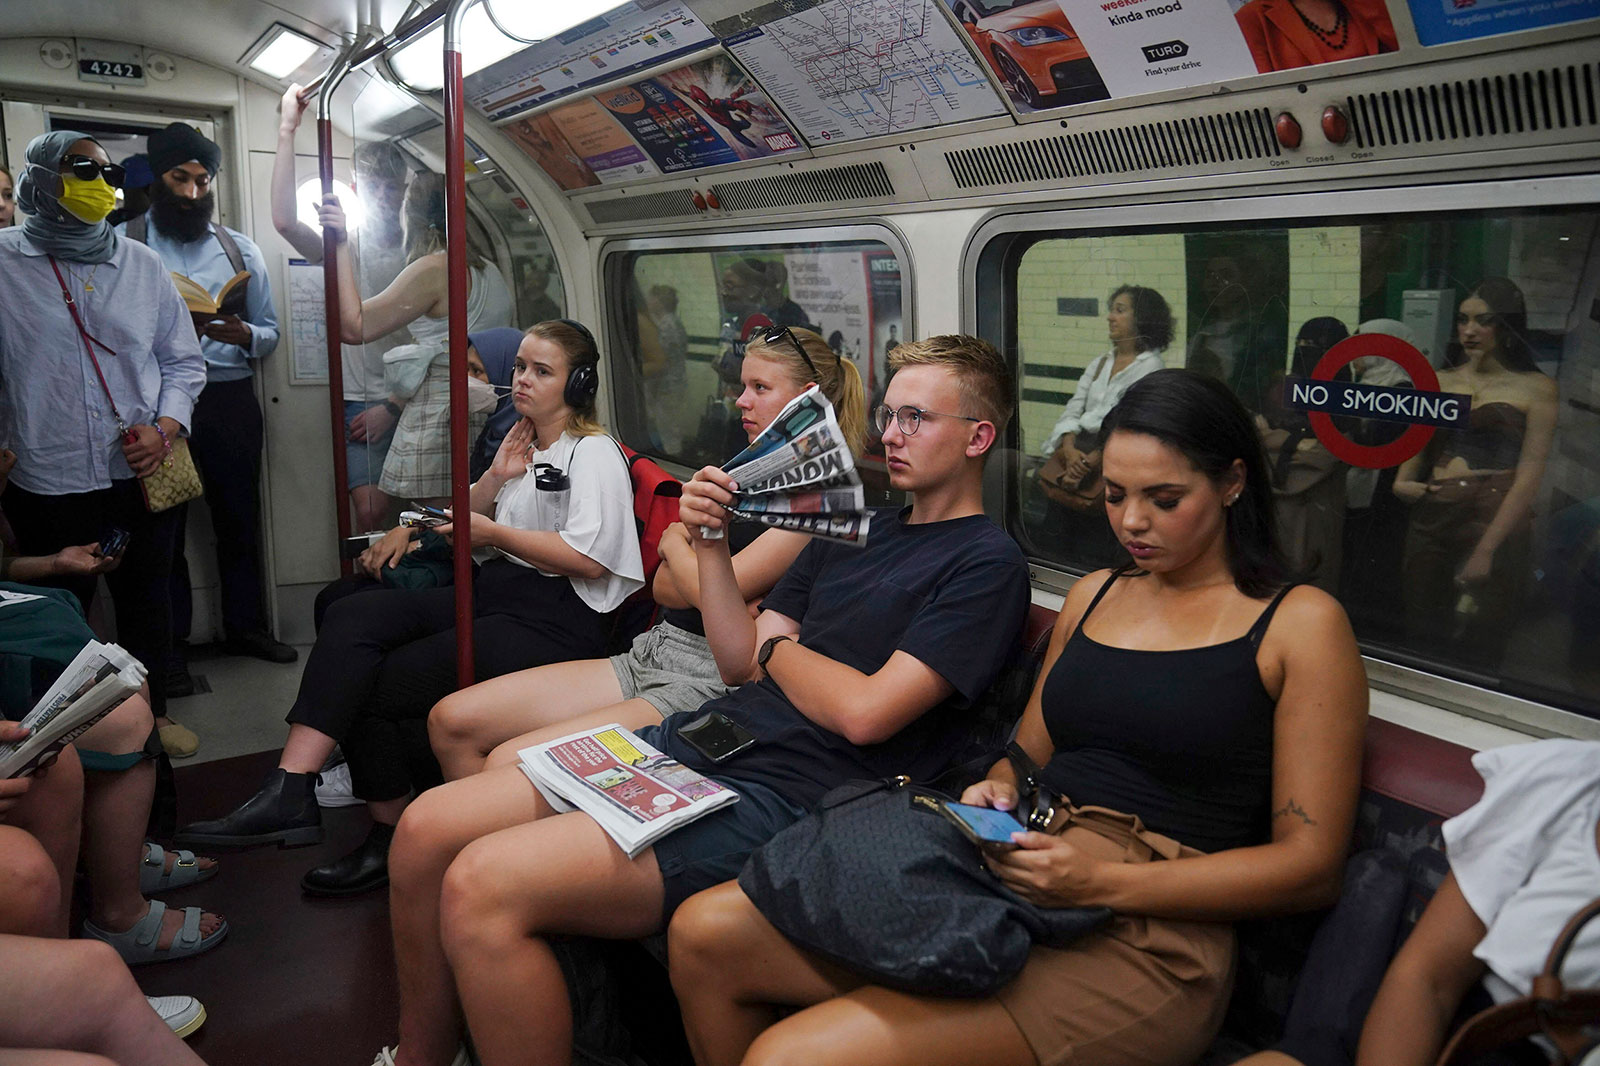 A man fans himself with a newspaper to keep himself cool while traveling on London's Underground on Monday.